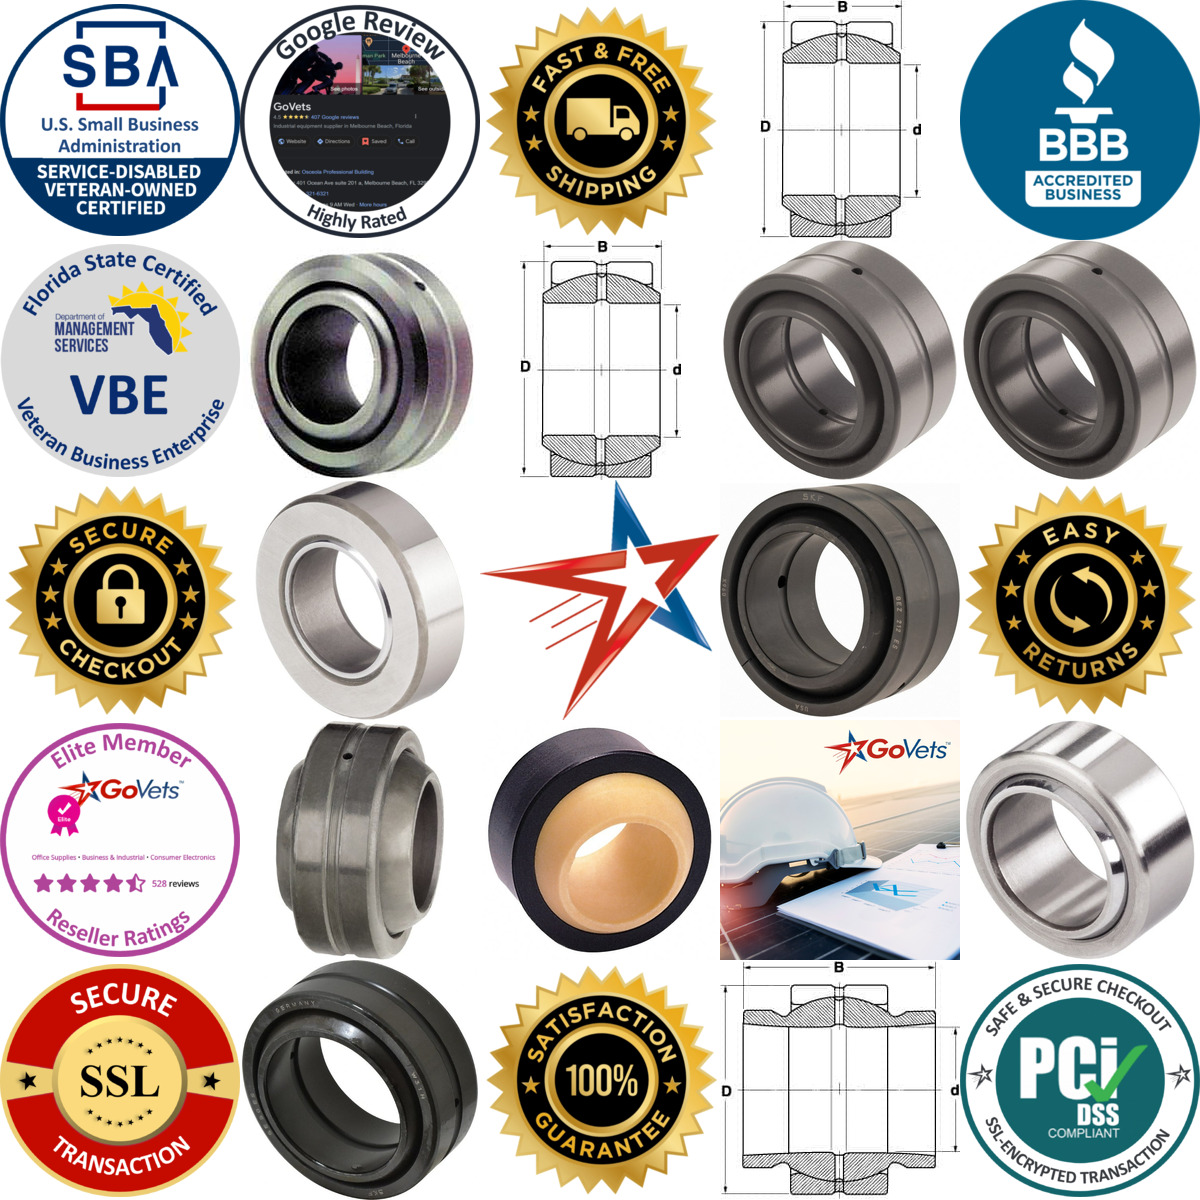 A selection of Spherical Plain Bearings products on GoVets